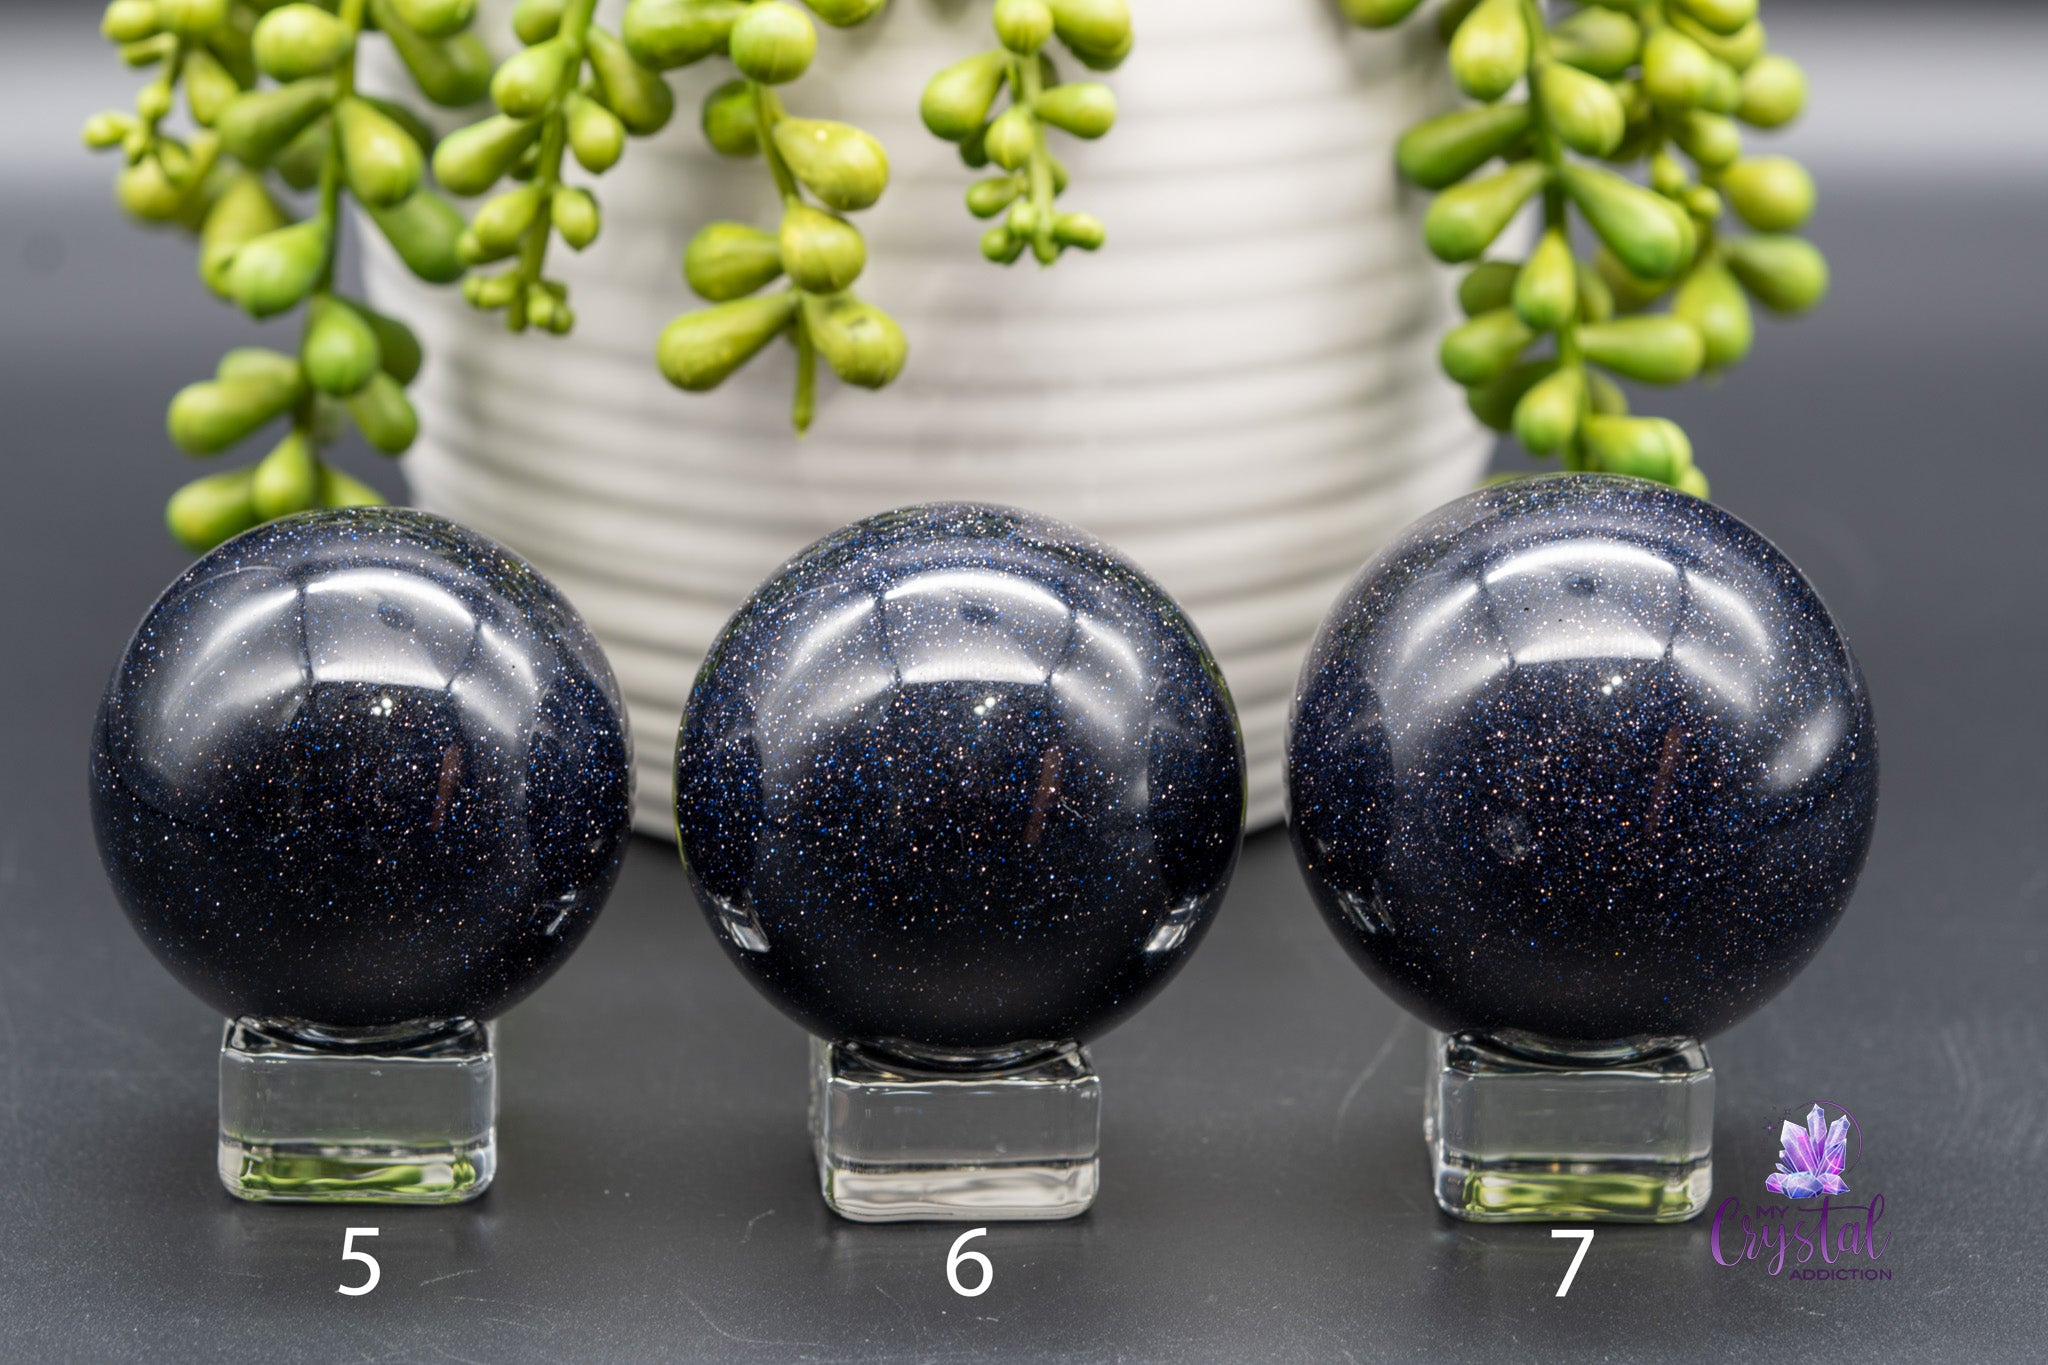 Blue Standstone / Blue Goldstone Sphere - 1.5"-2.1"/39mm-54mm - My Crystal Addiction